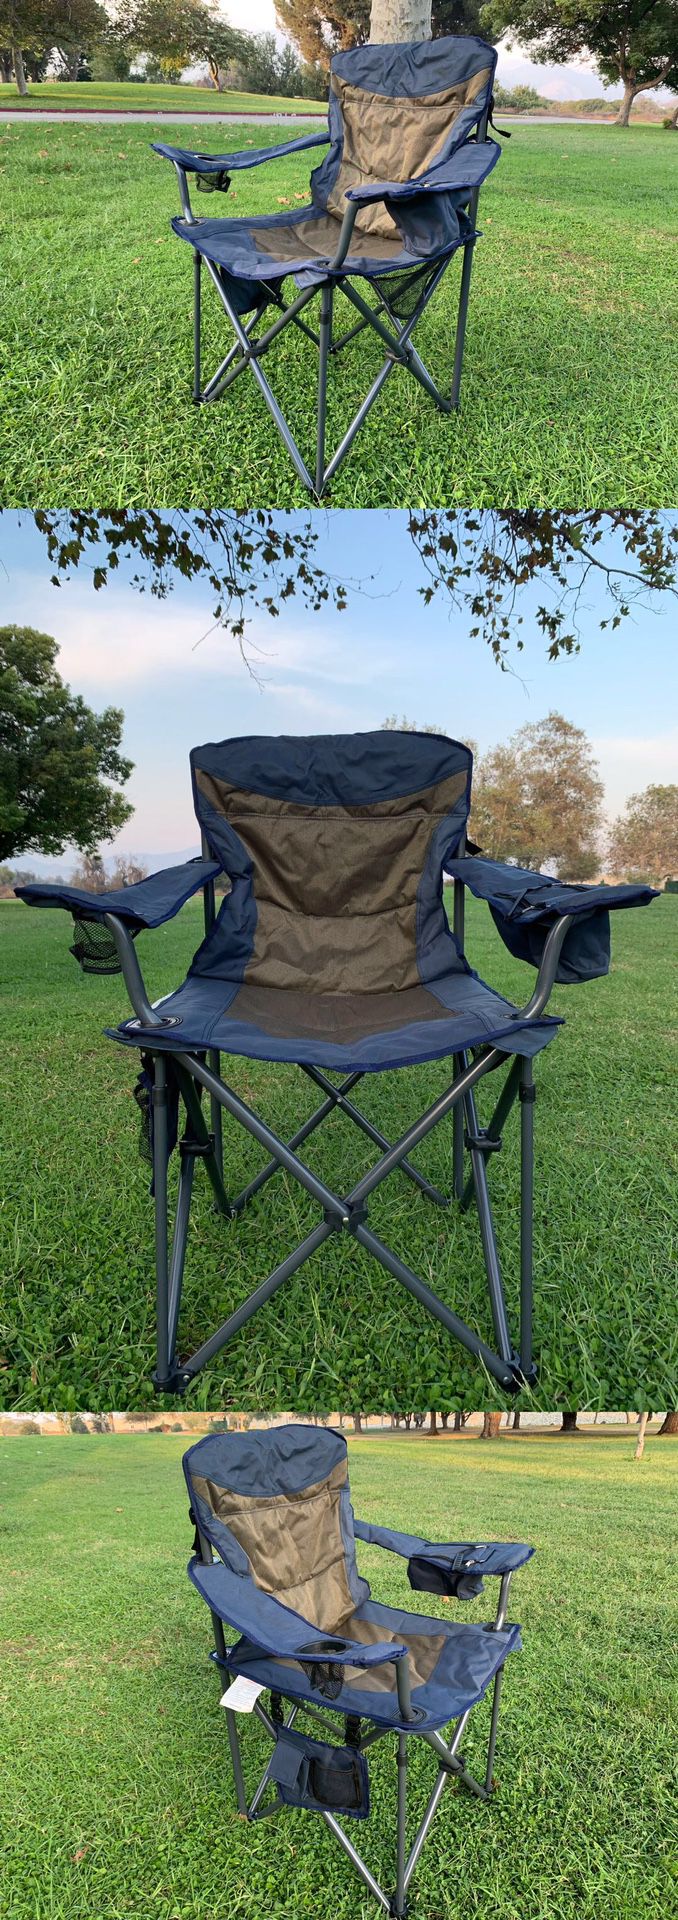 More pieces available. Brand new!Heavy-Duty Portable Camping Chair, Collapsible Padded Arm Chair with Cup Holders and Lower Mesh Side Pocket, Blue